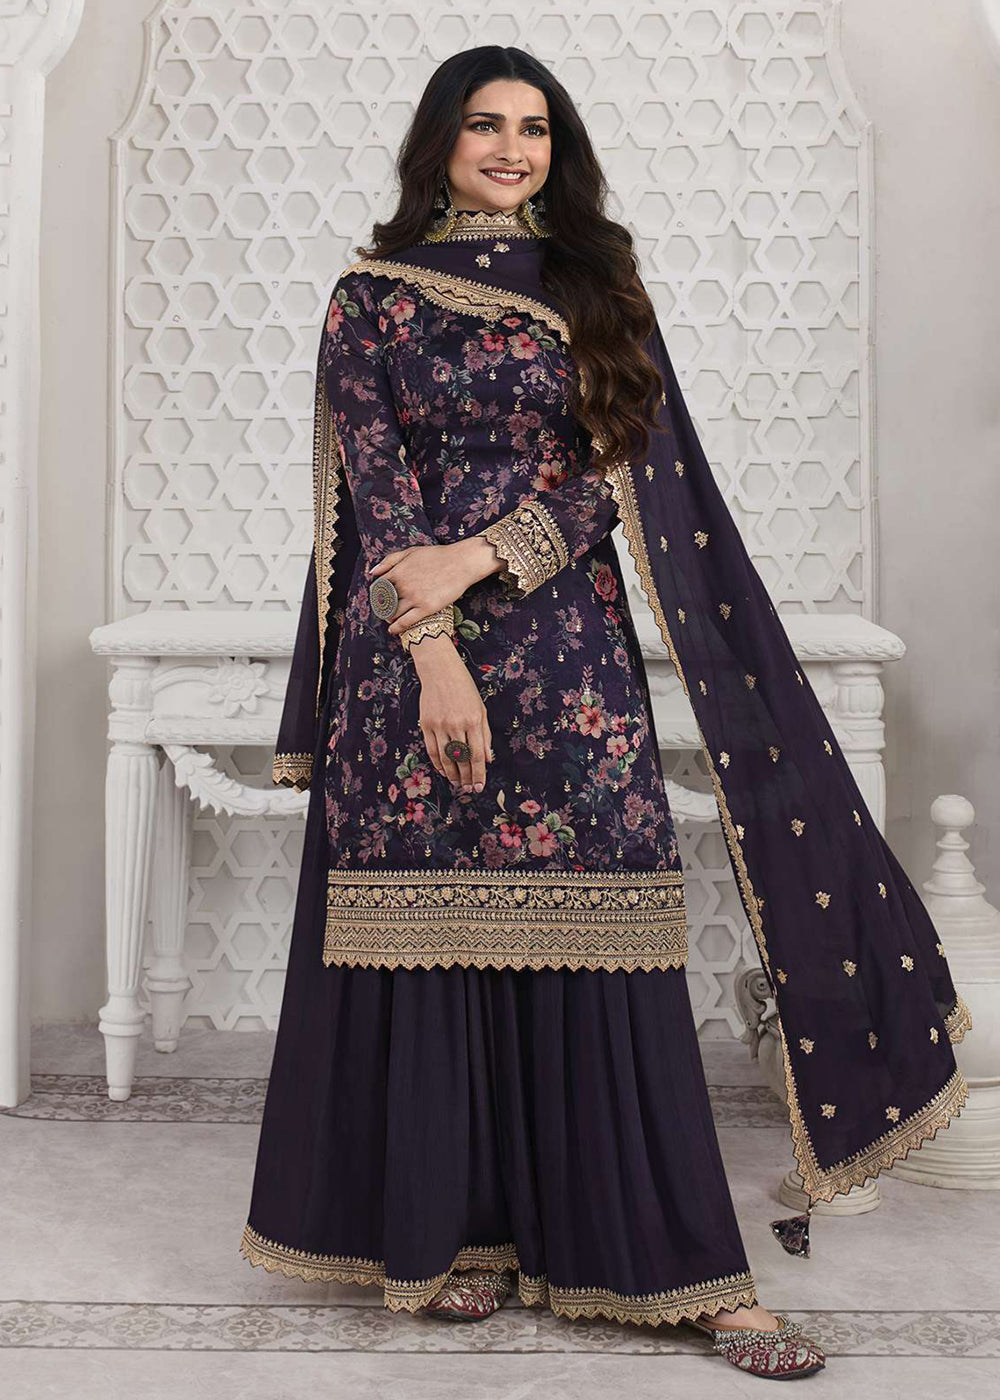 Shop Now Prachi Desai Navy Blue Silk Georgette Embroidered Sharara Suit Online at Empress Clothing in USA, UK, Canada, Italy & Worldwide.